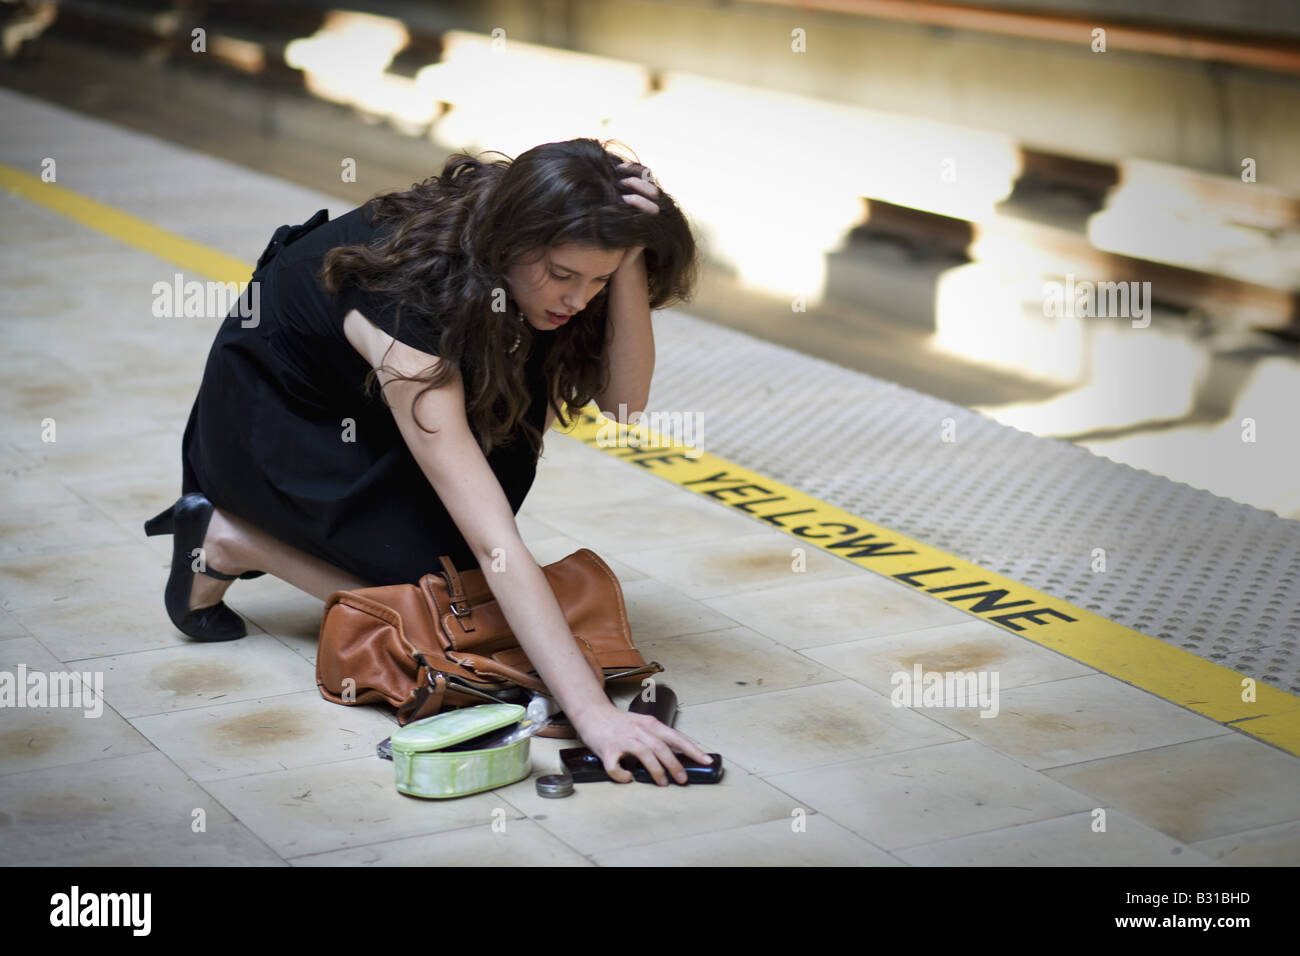 Young woman picking up spilled personal items from the floor Stock ...